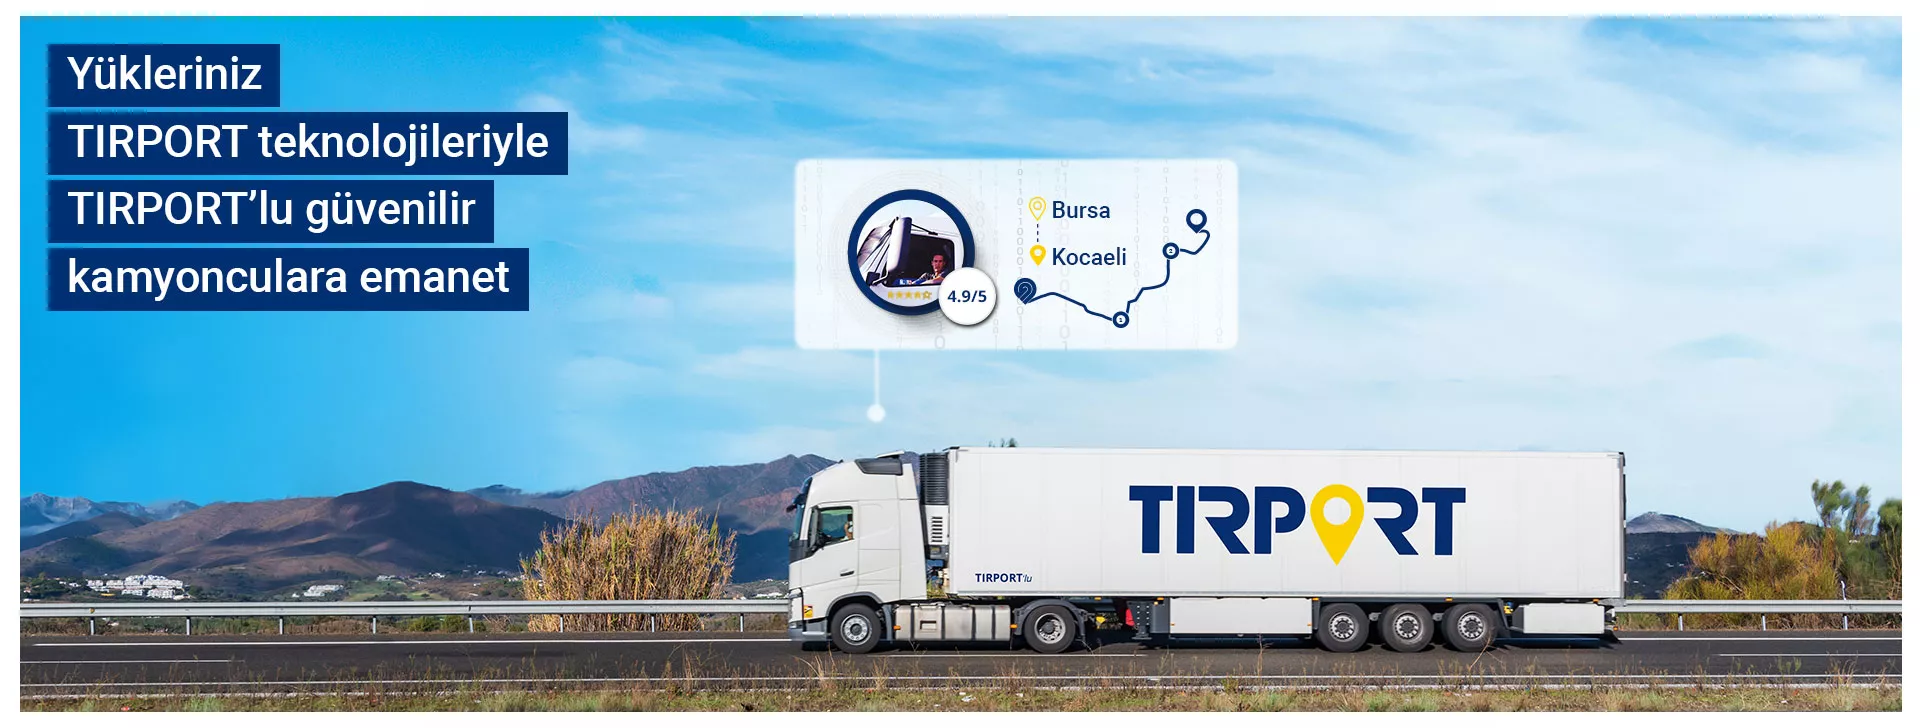 Your Shipments Are in the Safe Hands of Realiable Carriers and Technologies of TIRPORT